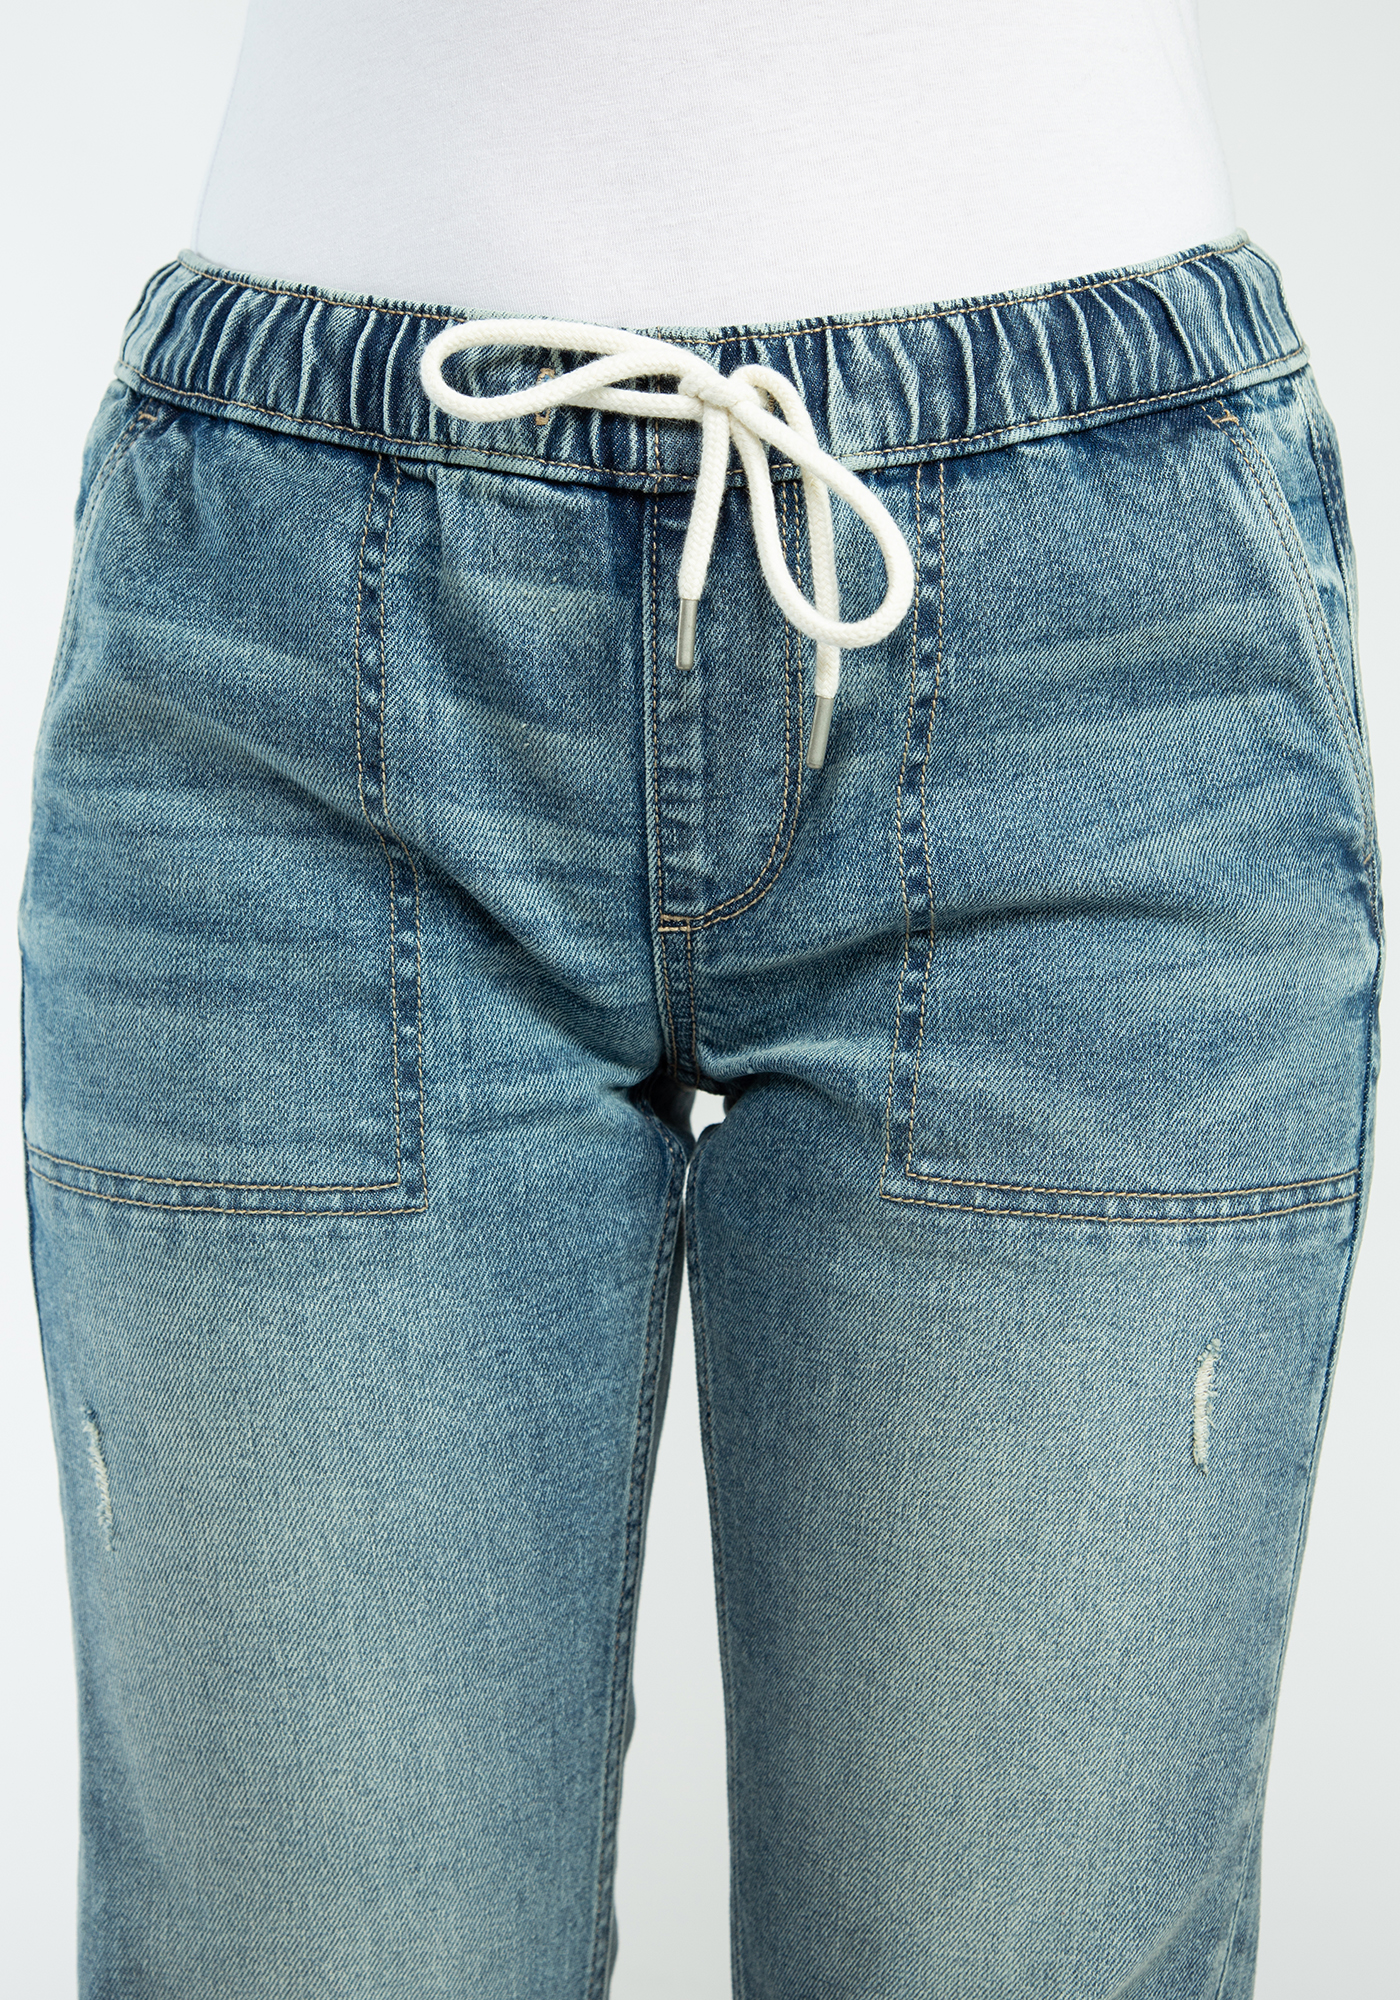 Jeans Jogger Mujer